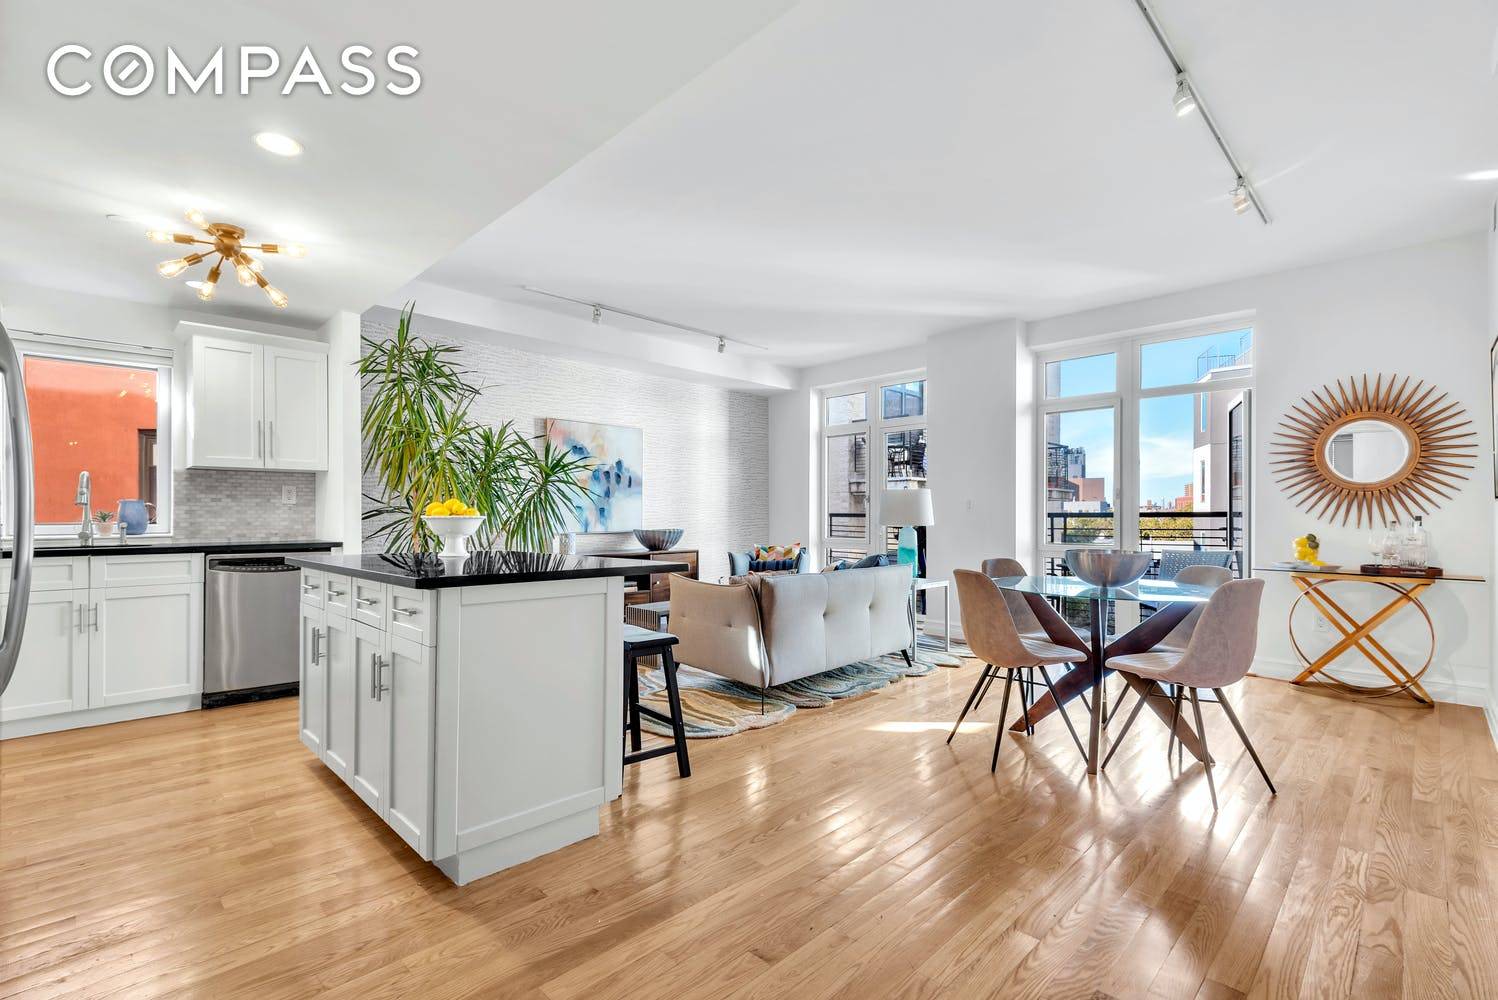 Welcome home to this spacious and light filled three bedroom, two bathroom condo in one of the most sought after locations in all of Brooklyn.